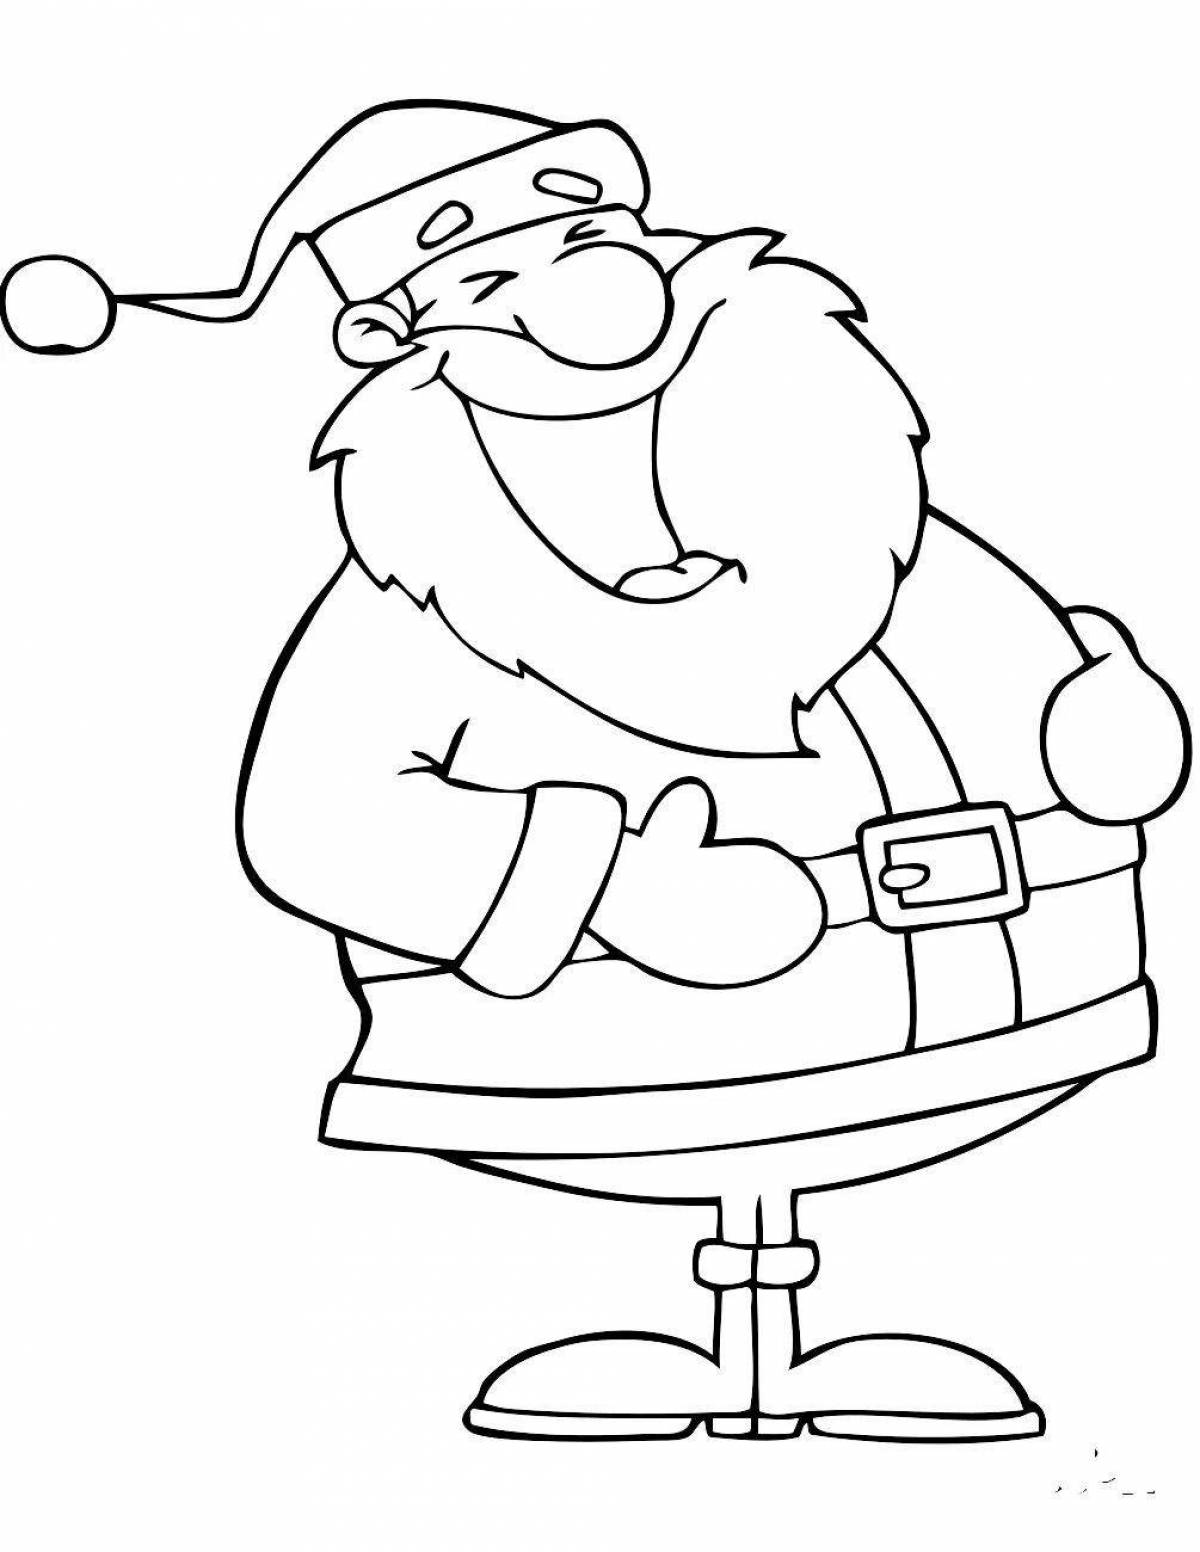 Witty coloring santa claus funny